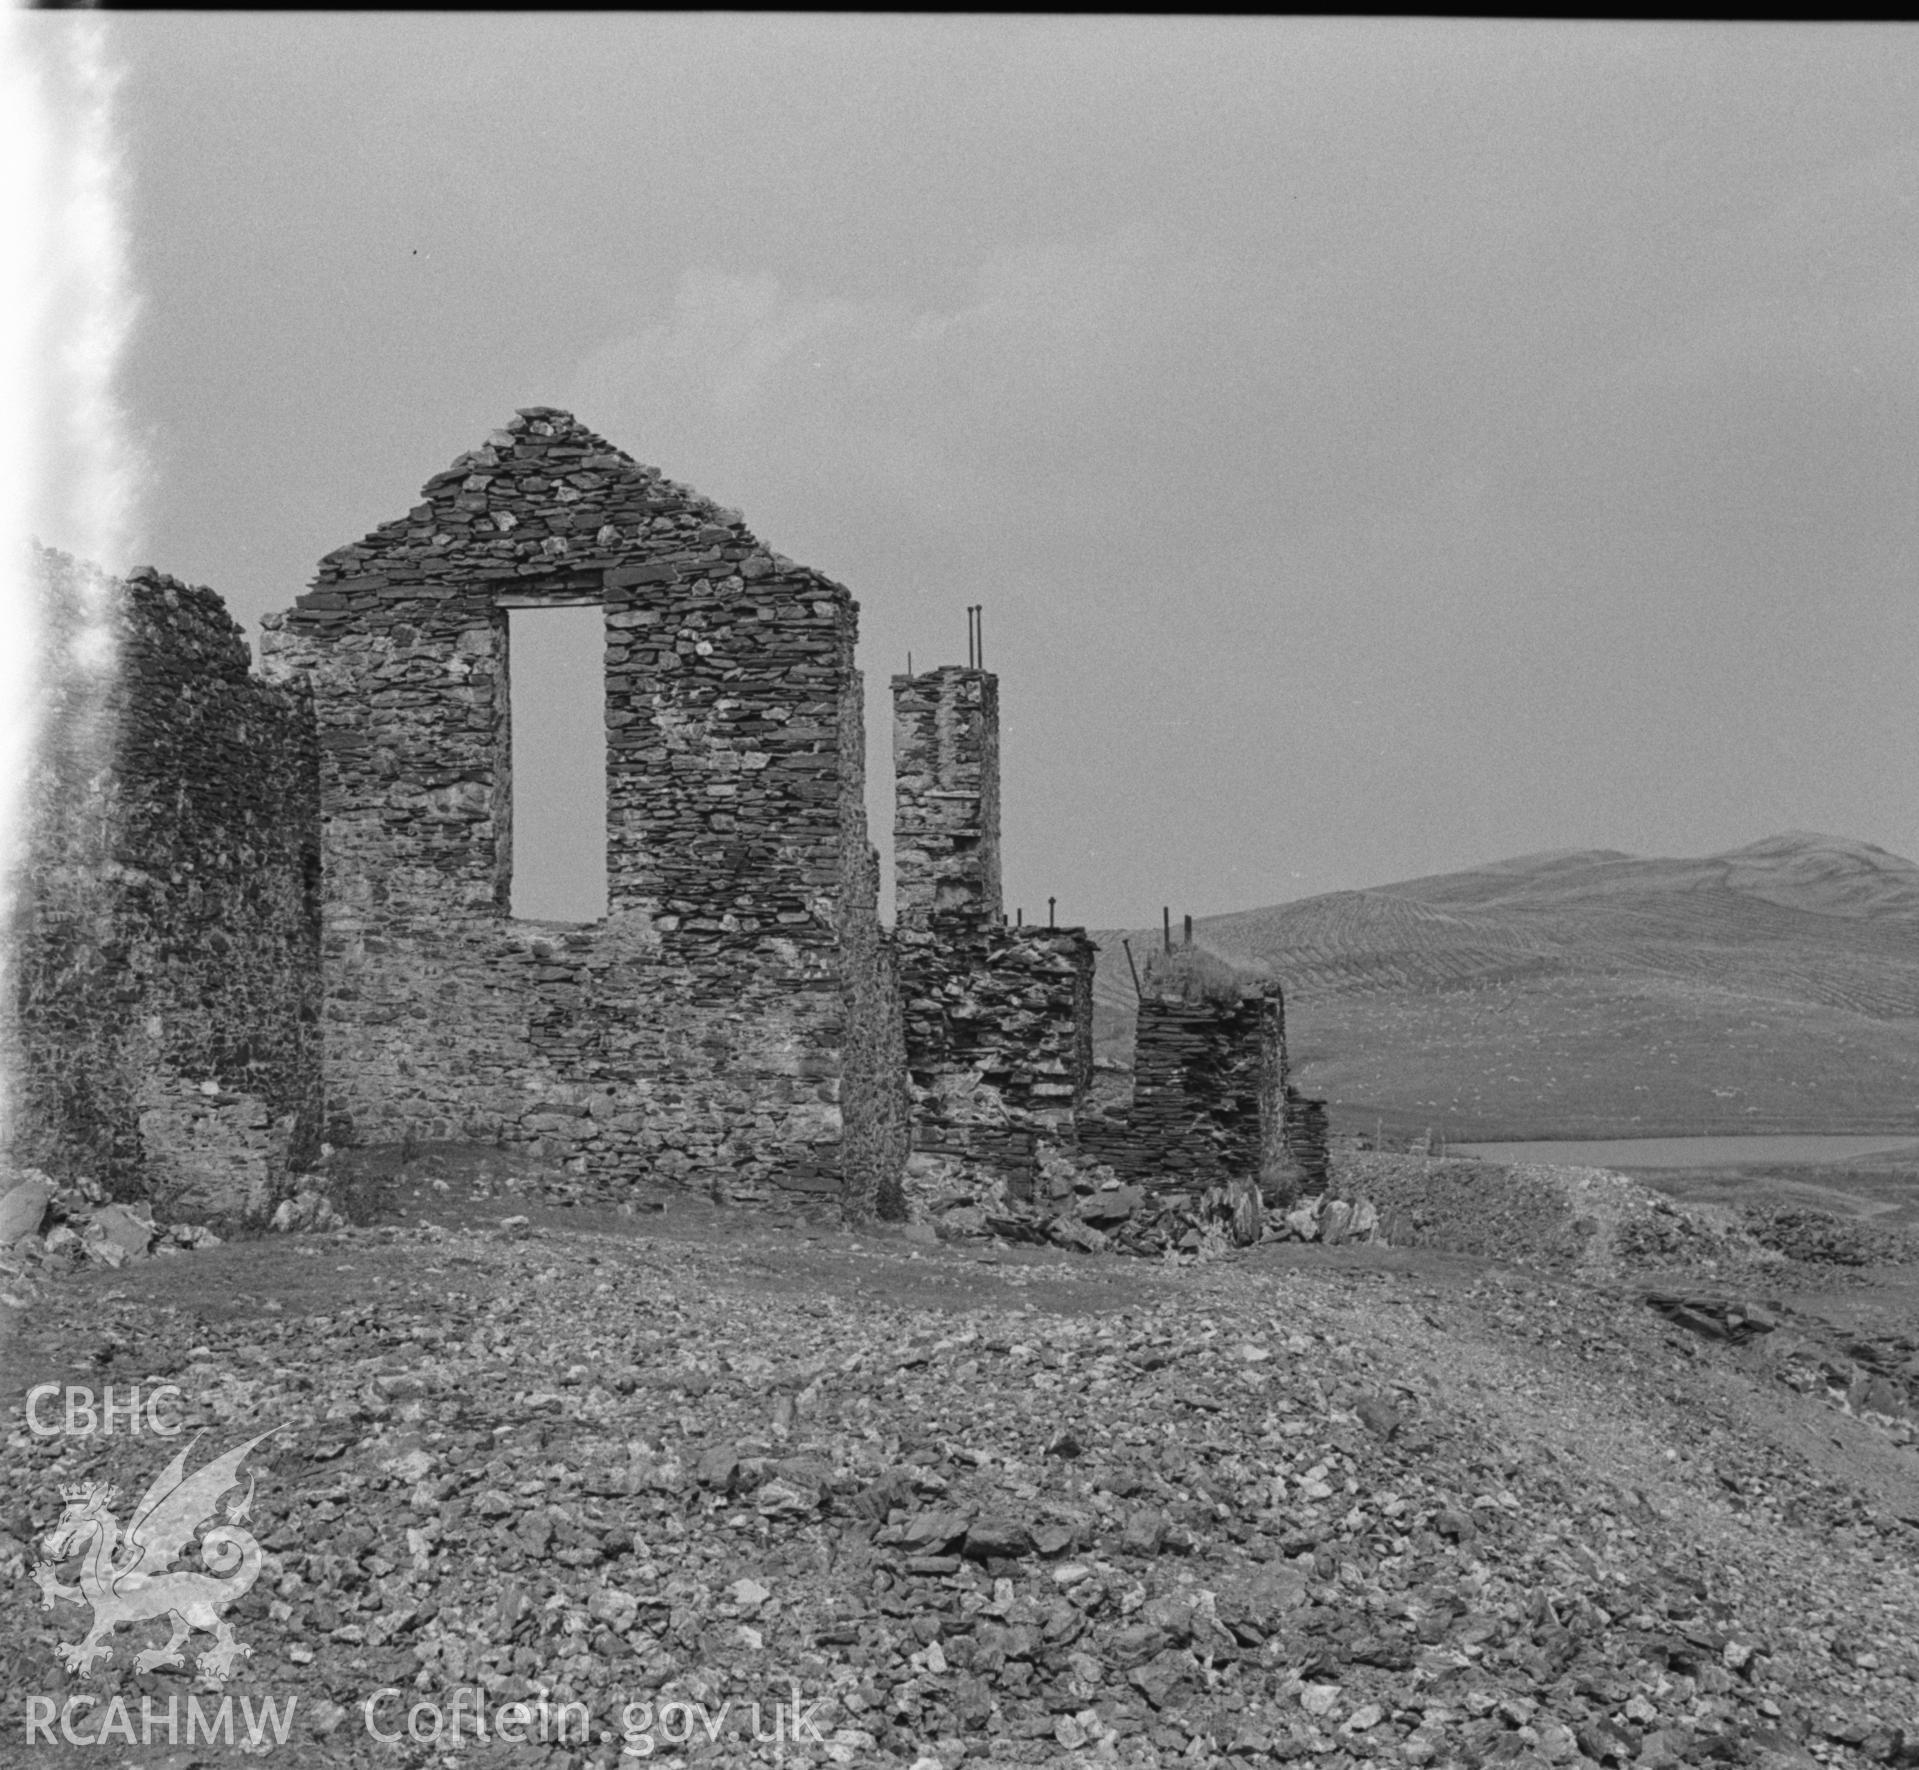 Digital copy of a black and white negative showing ruin at the top of Esgair Hir lead mine, Ceulanamaesmawr. Photographed by Arthur O. Chater on 22nd August 1967, looking north east from Grid Reference SN 734 913.